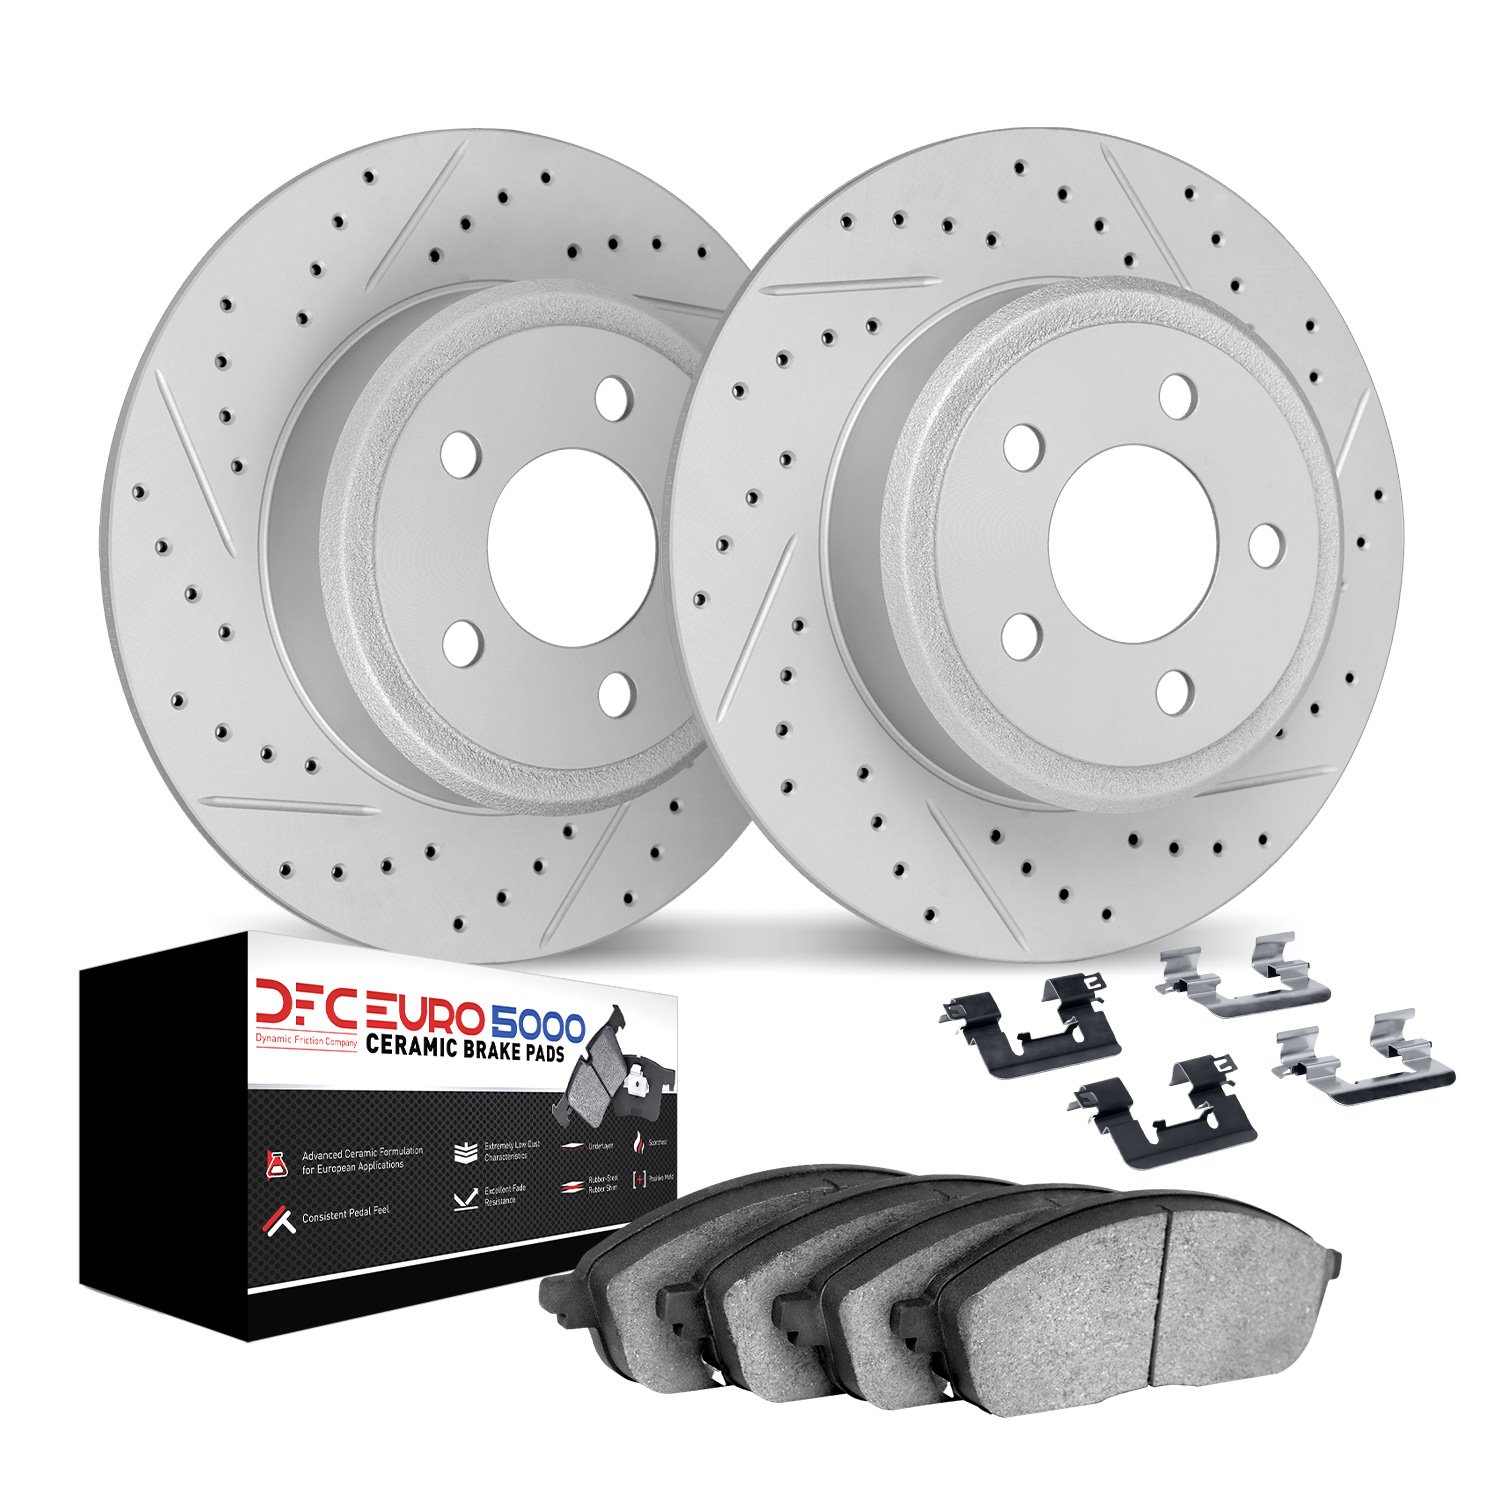 2612-02000 Geoperformance Drilled/Slotted Rotors w/5000 Euro Ceramic Brake Pads Kit & Hardware, 1976-1976 Porsche, Position: Fro